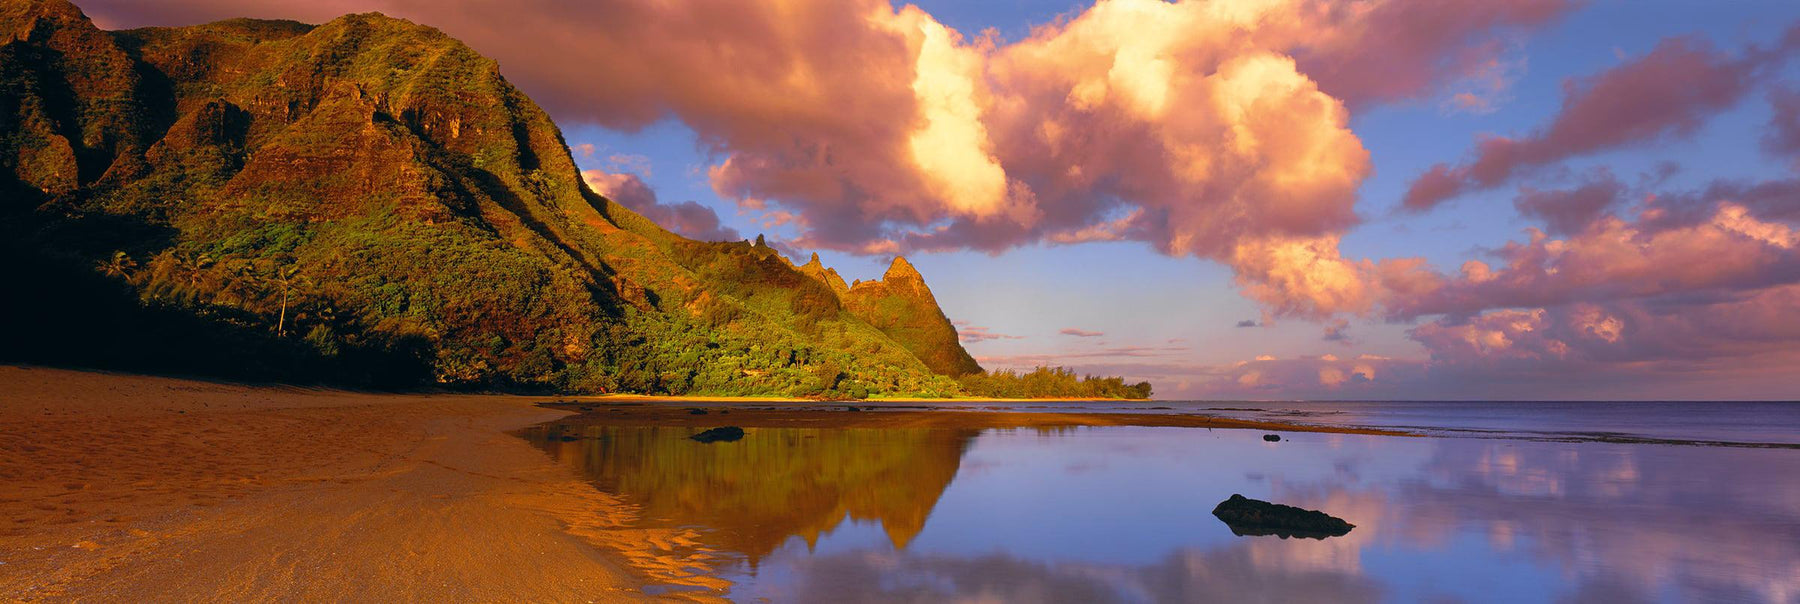 Water filled tide pools reflecting the clouds and cliffs along the shoreline of the Na Pali Coast Hawaii